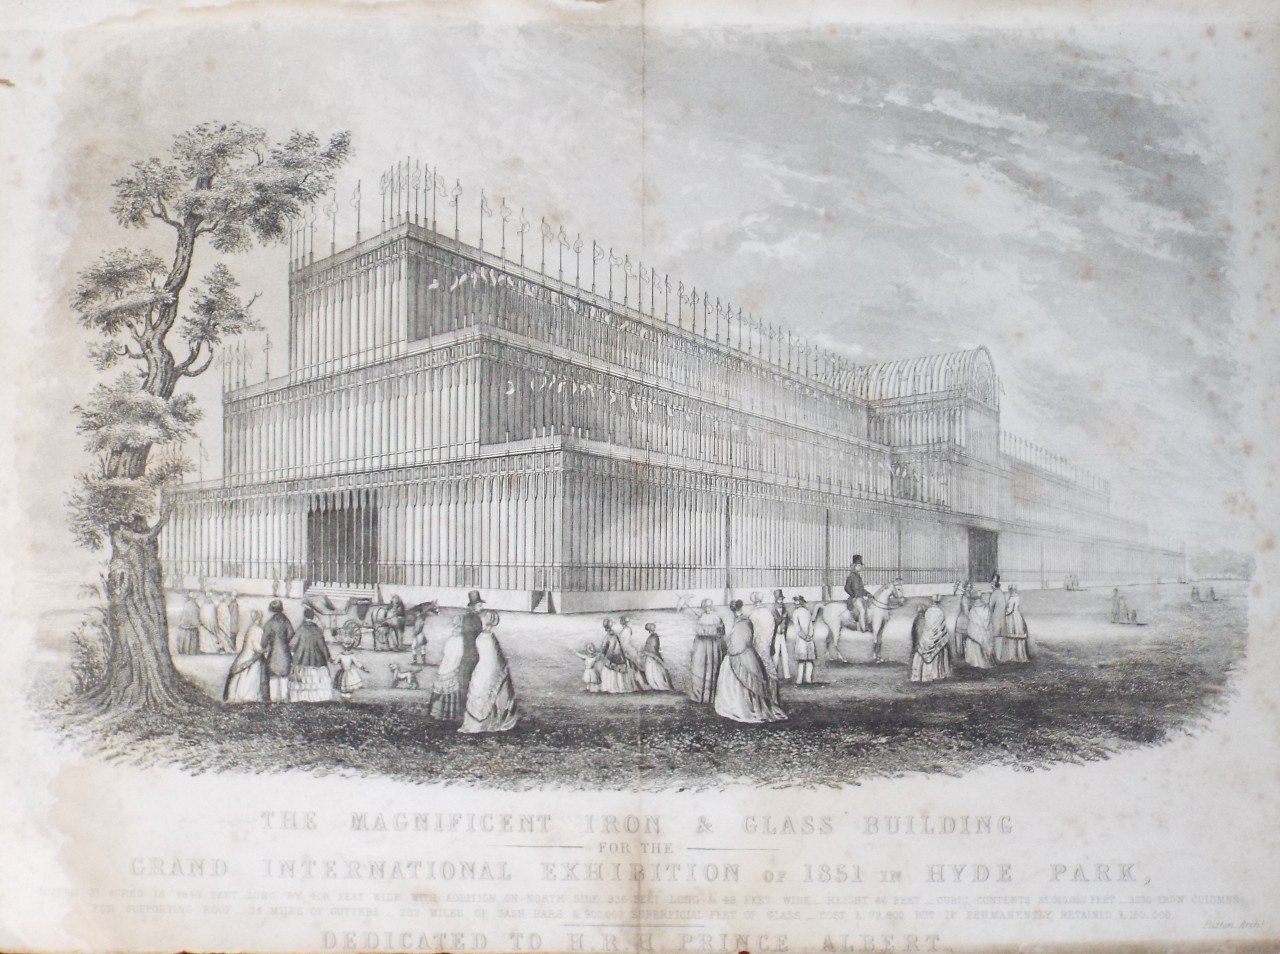 Print - The Magnificent Iron & Glass Building for the Grand International Exhibition of 1851 in Hyde Park